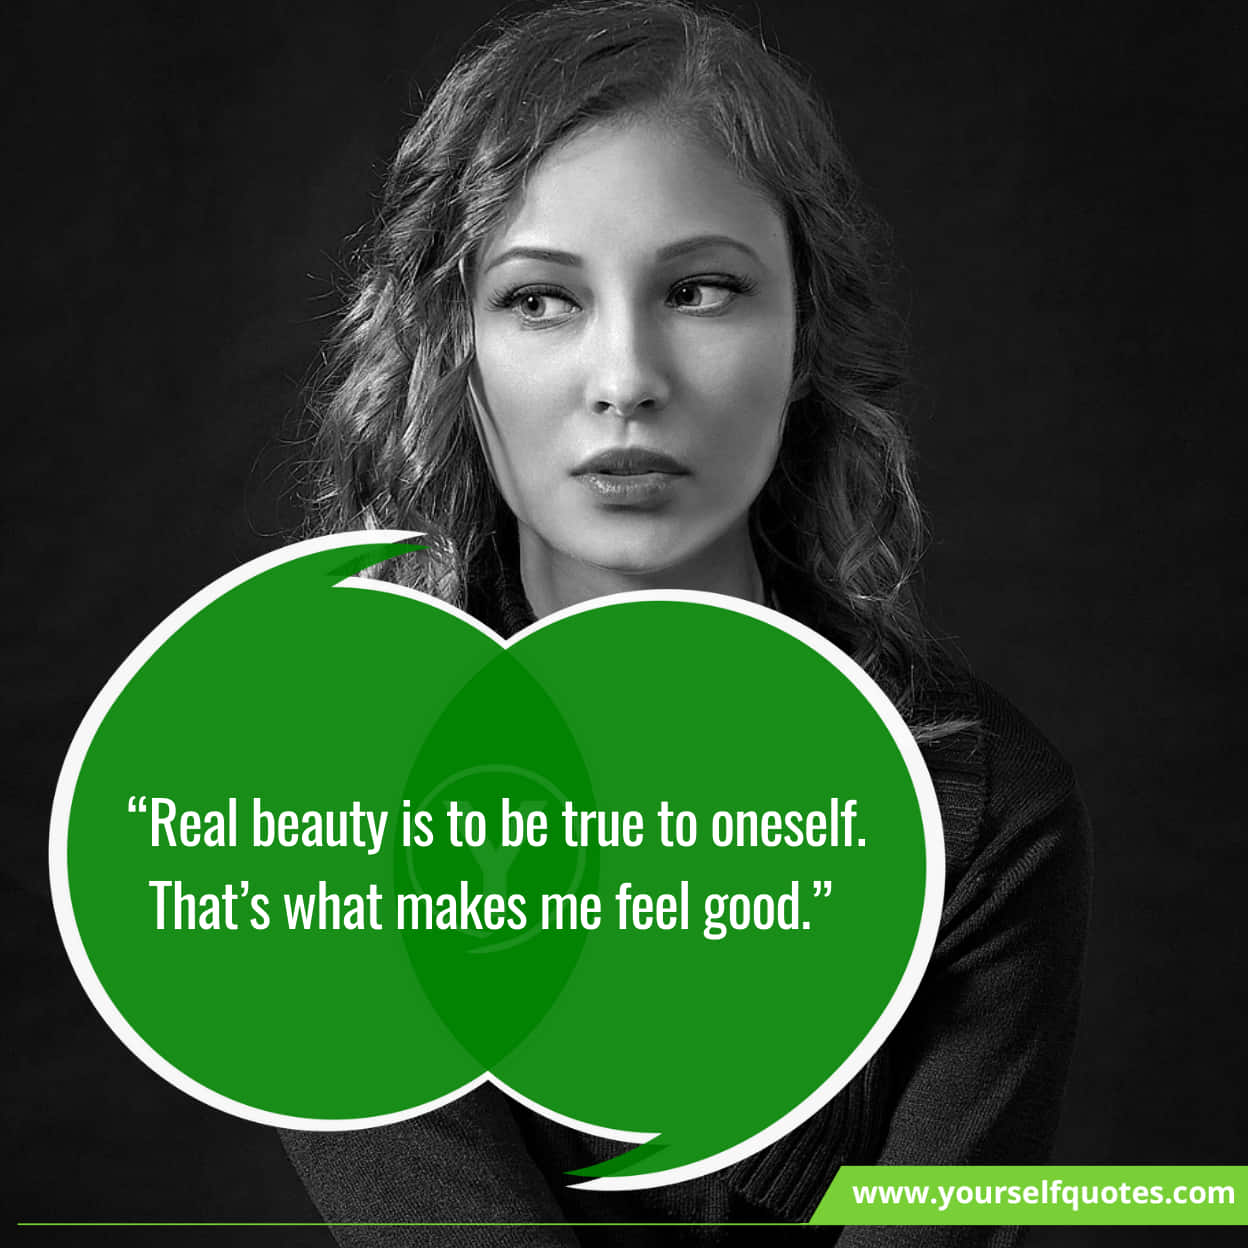 Express Beauty Quotes That Make You Living A Beautiful Life